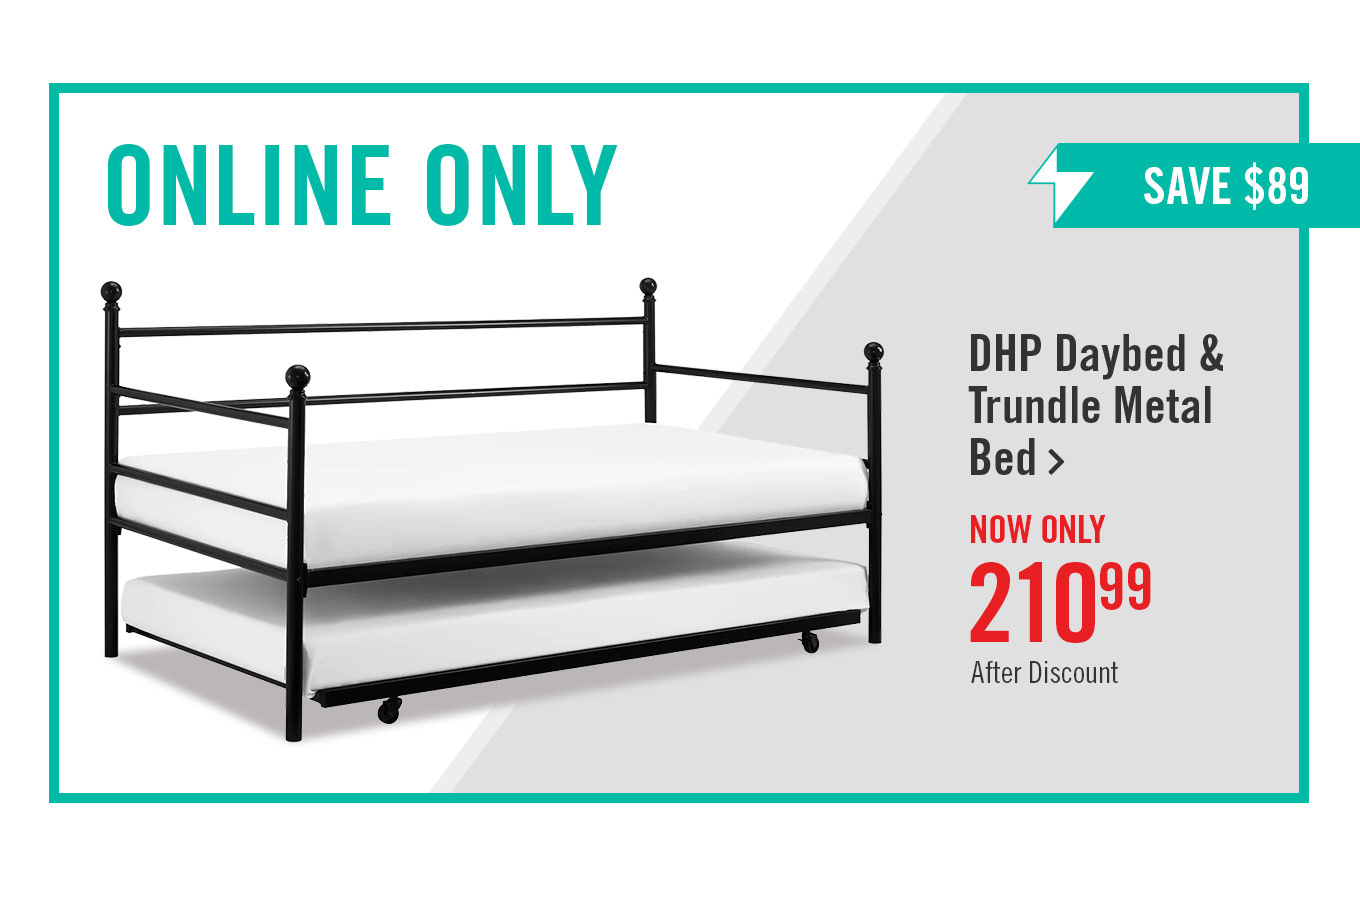 DHP Daybed and Trundle Metal Bed